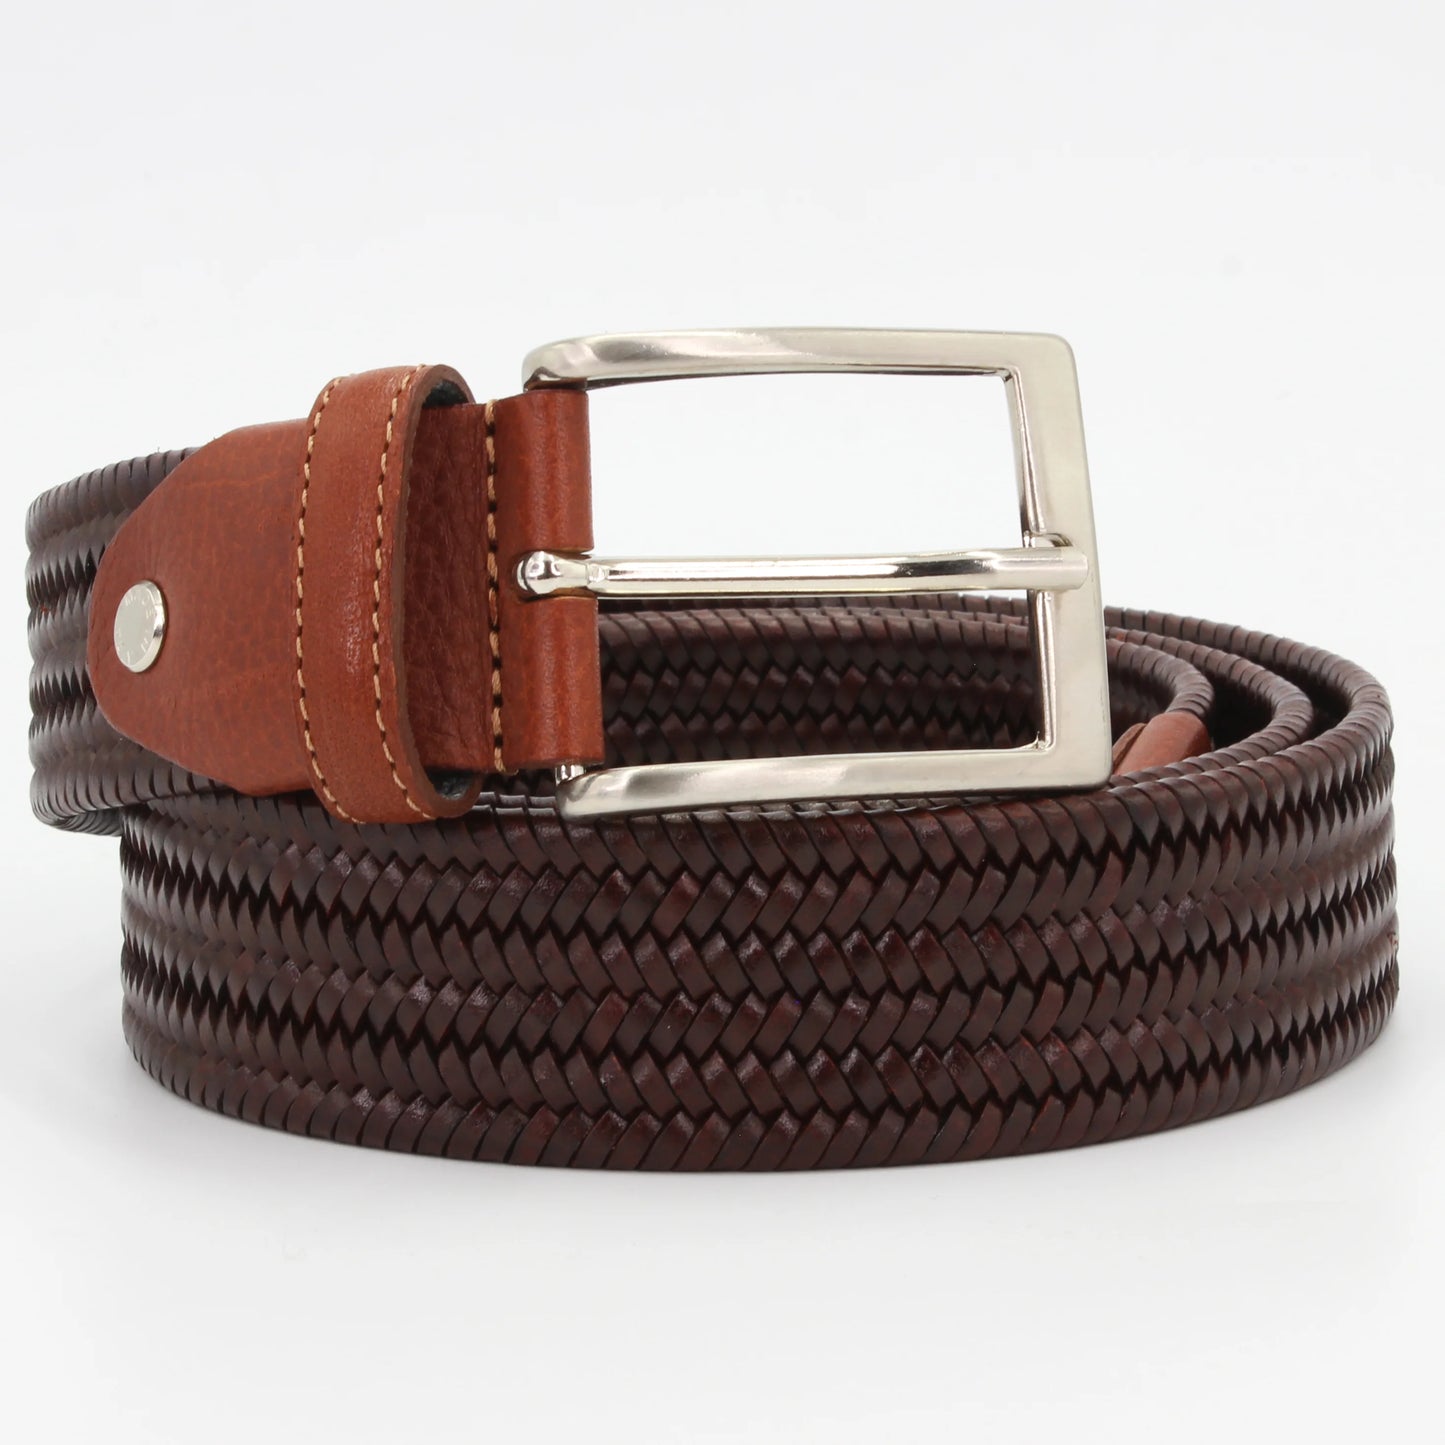 Shop our Italian-made Cuoieria Fiorentina woven leather belt in marrone (C10DGEL00G000) or browse our range of Italian belts for men & women in-store at Aliverti Cape Town, or shop online.   We deliver in South Africa & offer multiple payment plans as well as accept multiple safe & secure payment methods.